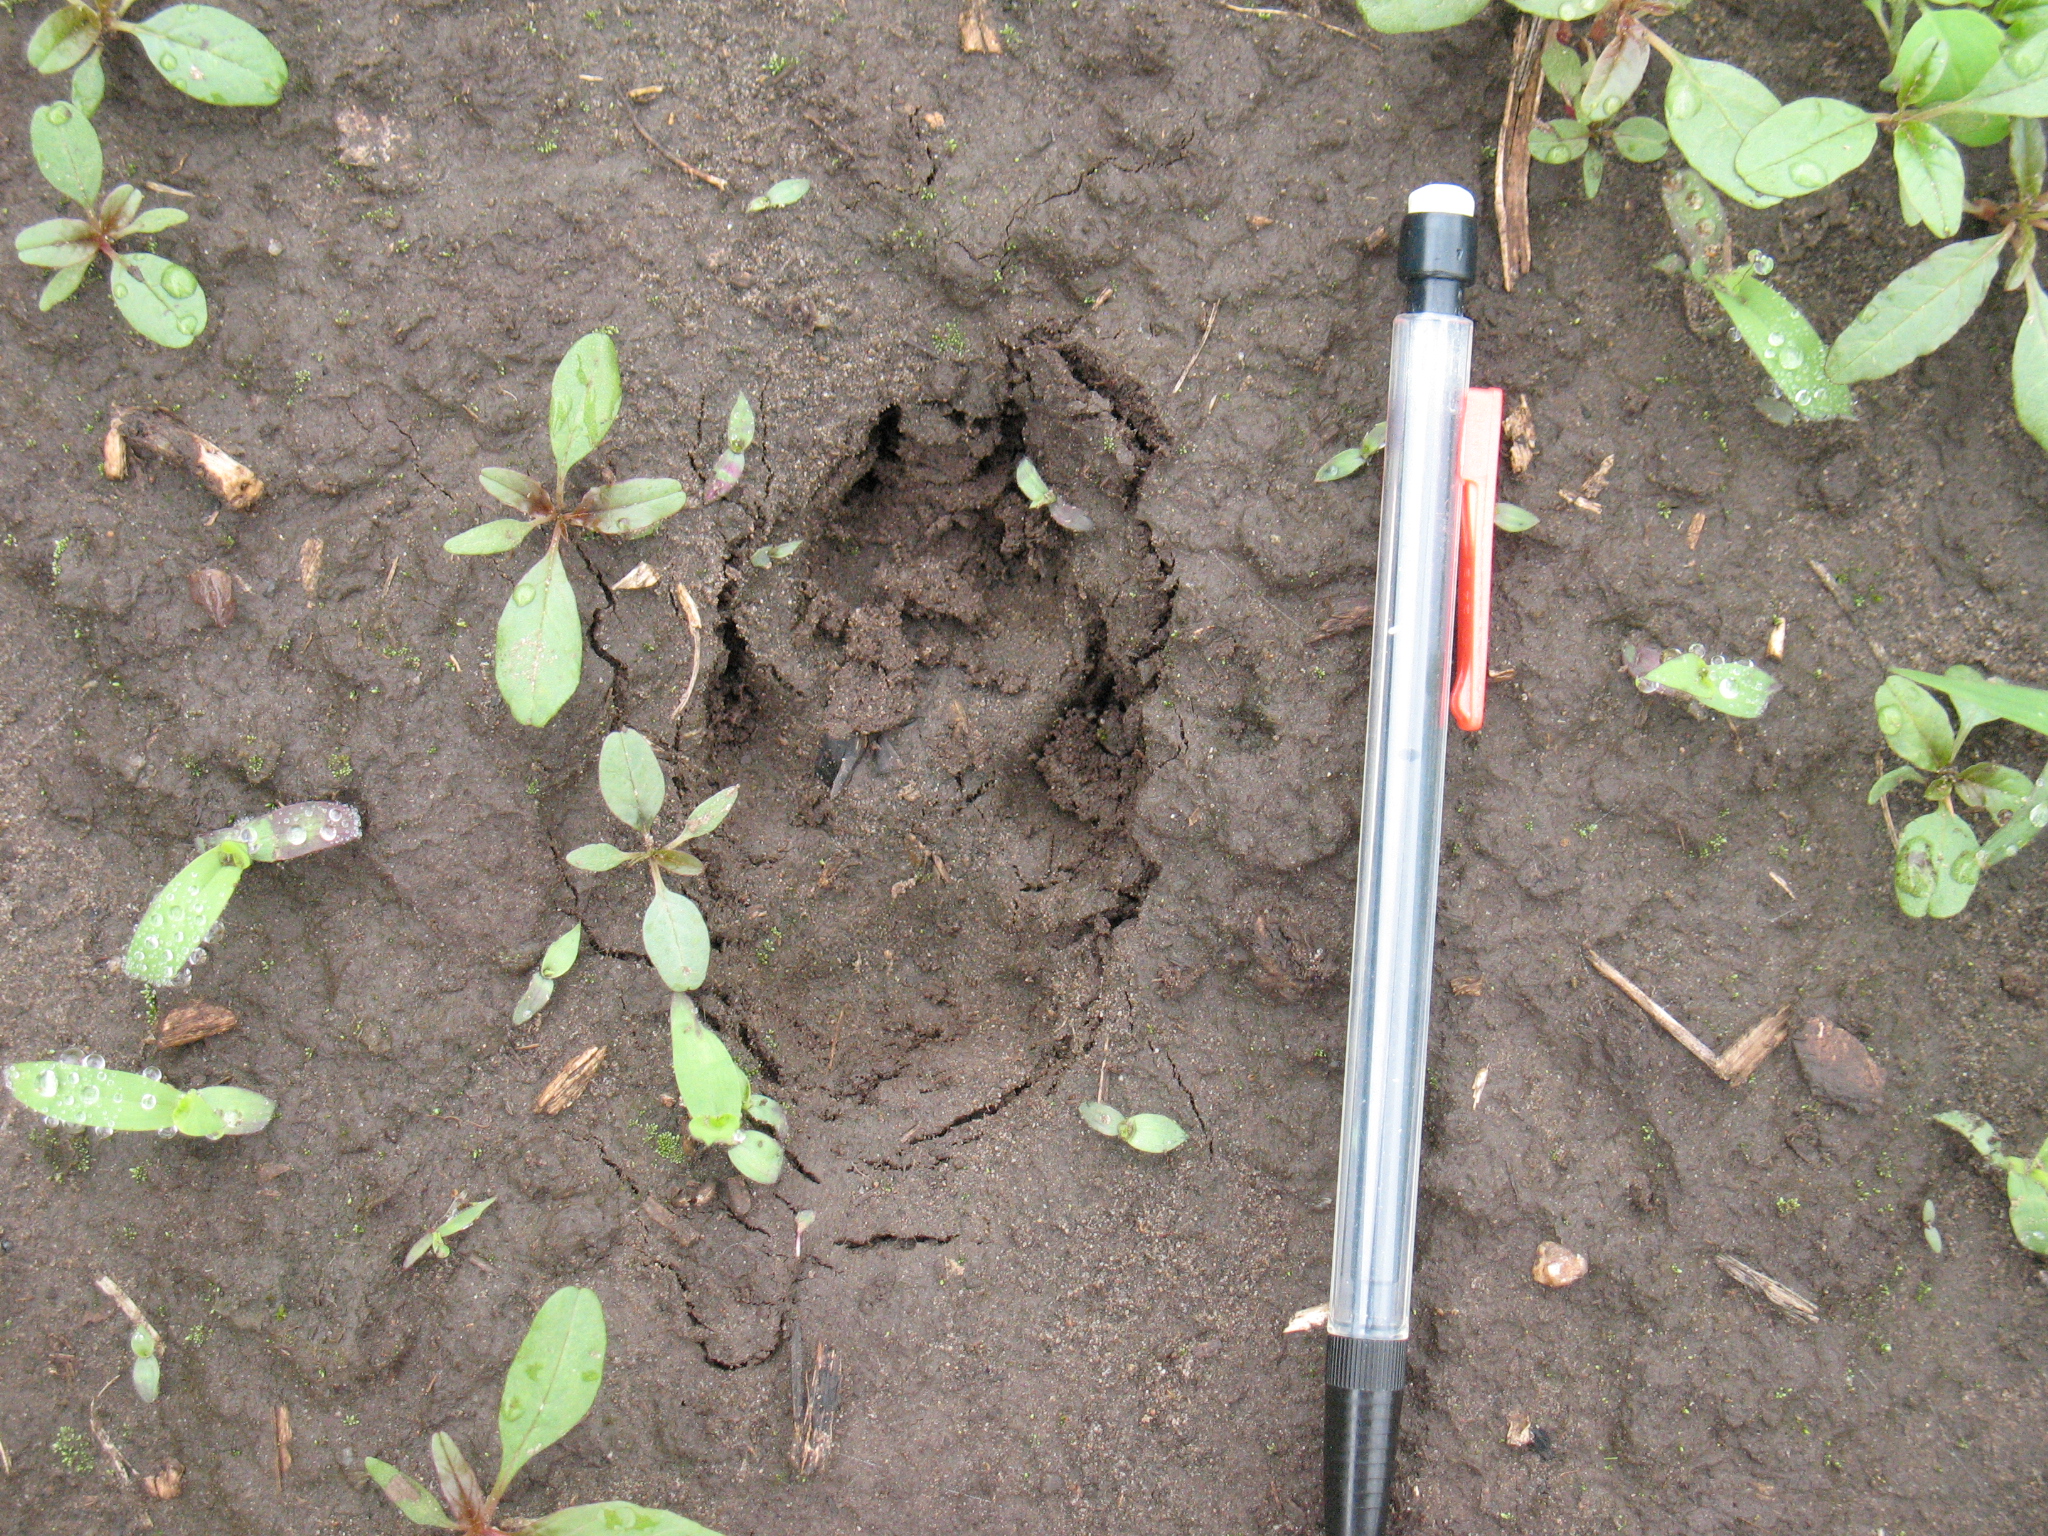 This coyote track is one of the many examples of the clues used to the identity the wildlife that frequent Houlton Farm.